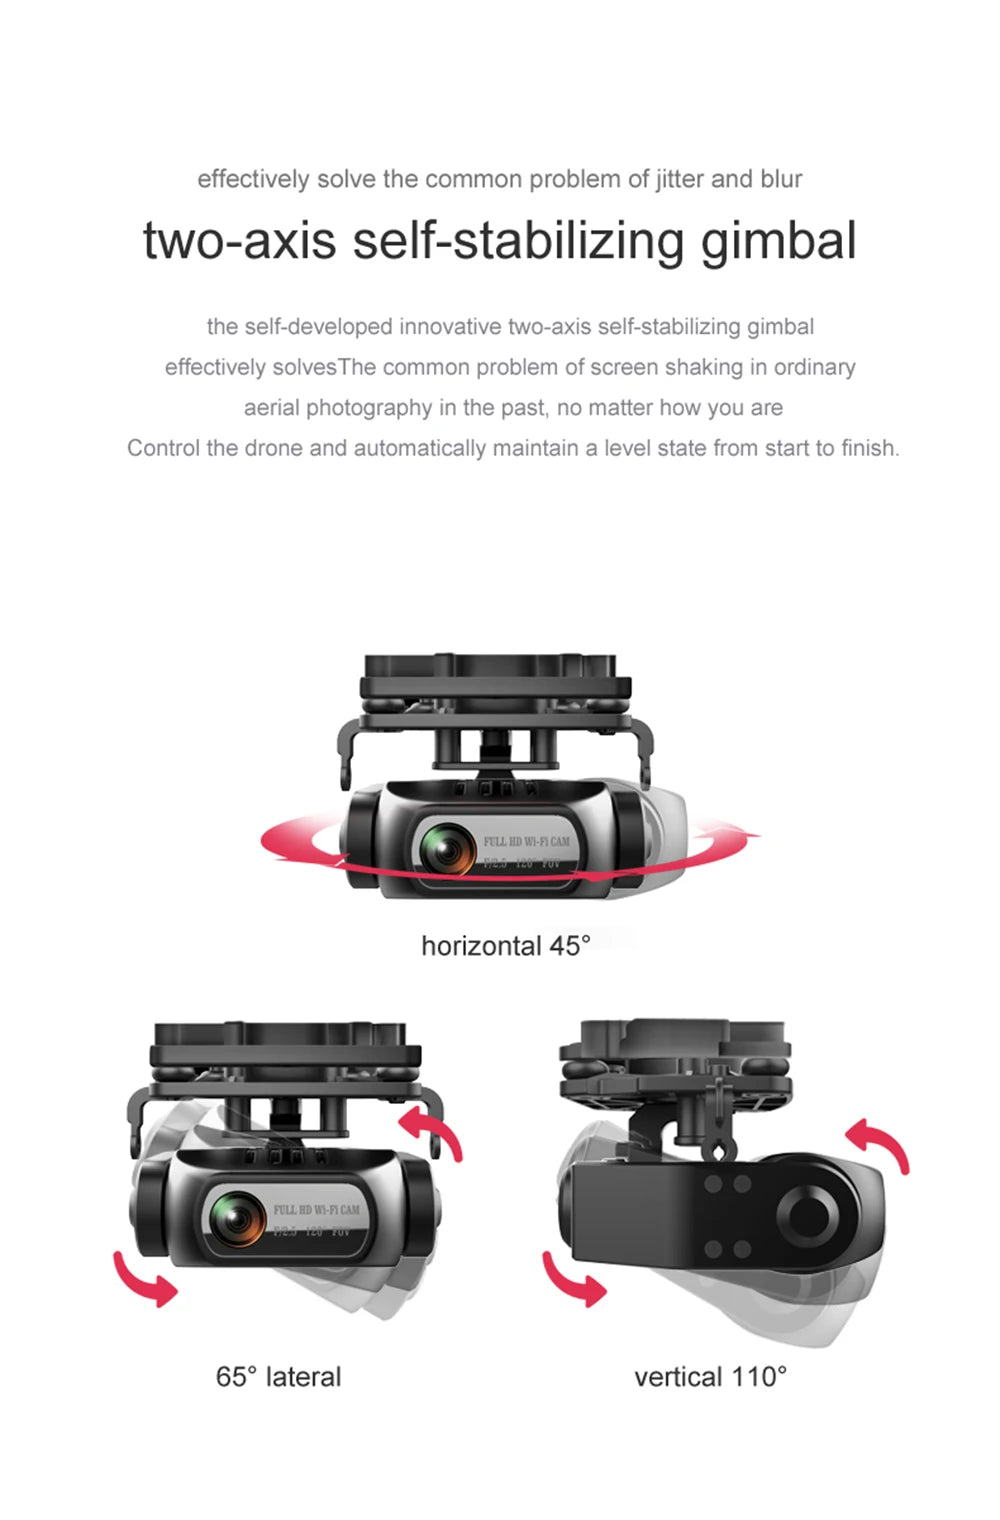 VISUO ZEN K1 PRO Drone, the self-developed innovative two-axis self-stabilizing gimbal effectively solve